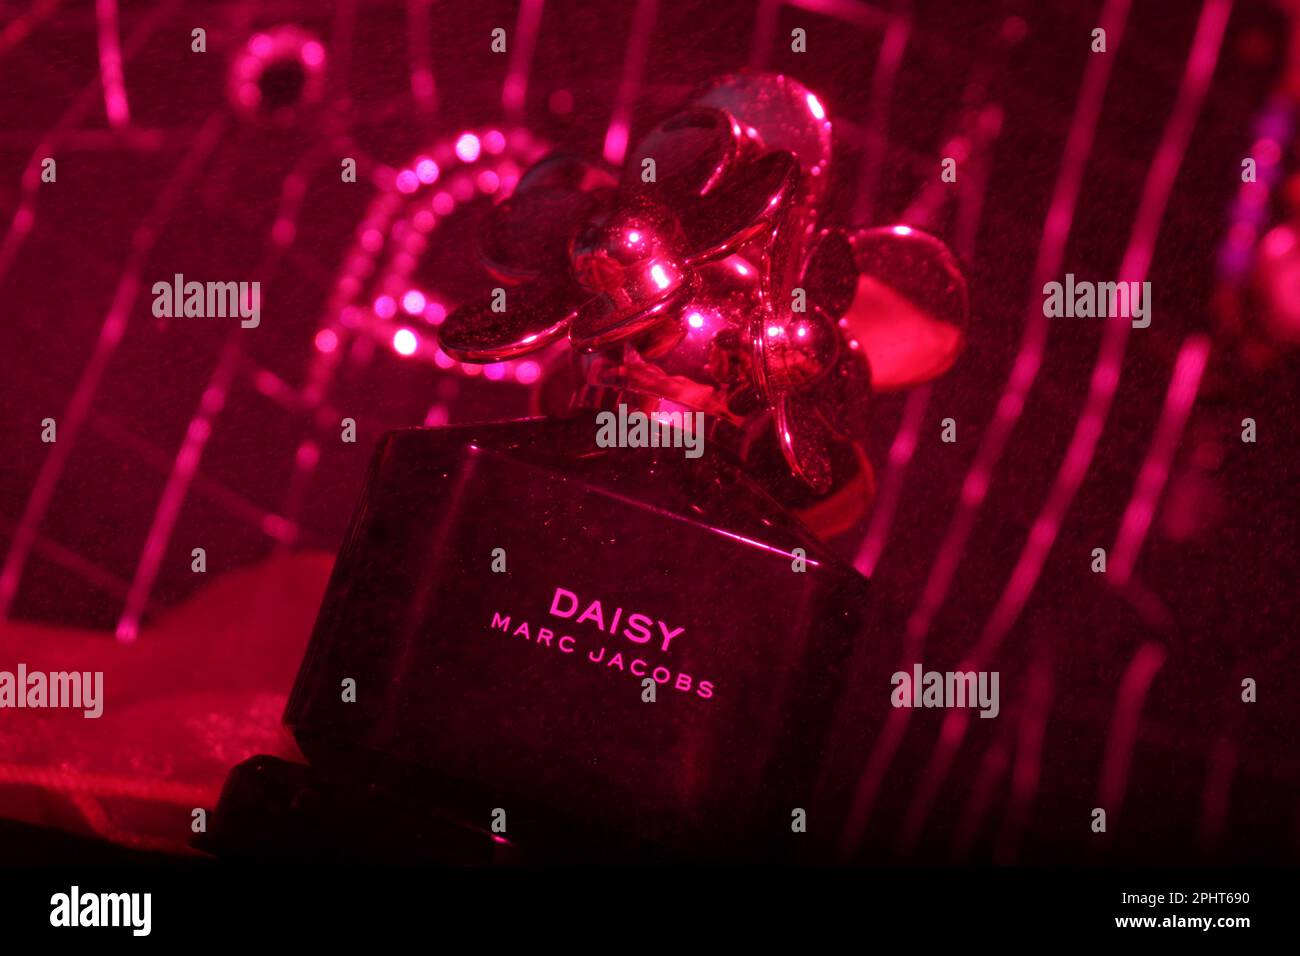 Daisy Marc Jacobs, Advertising Picture Stock Photo